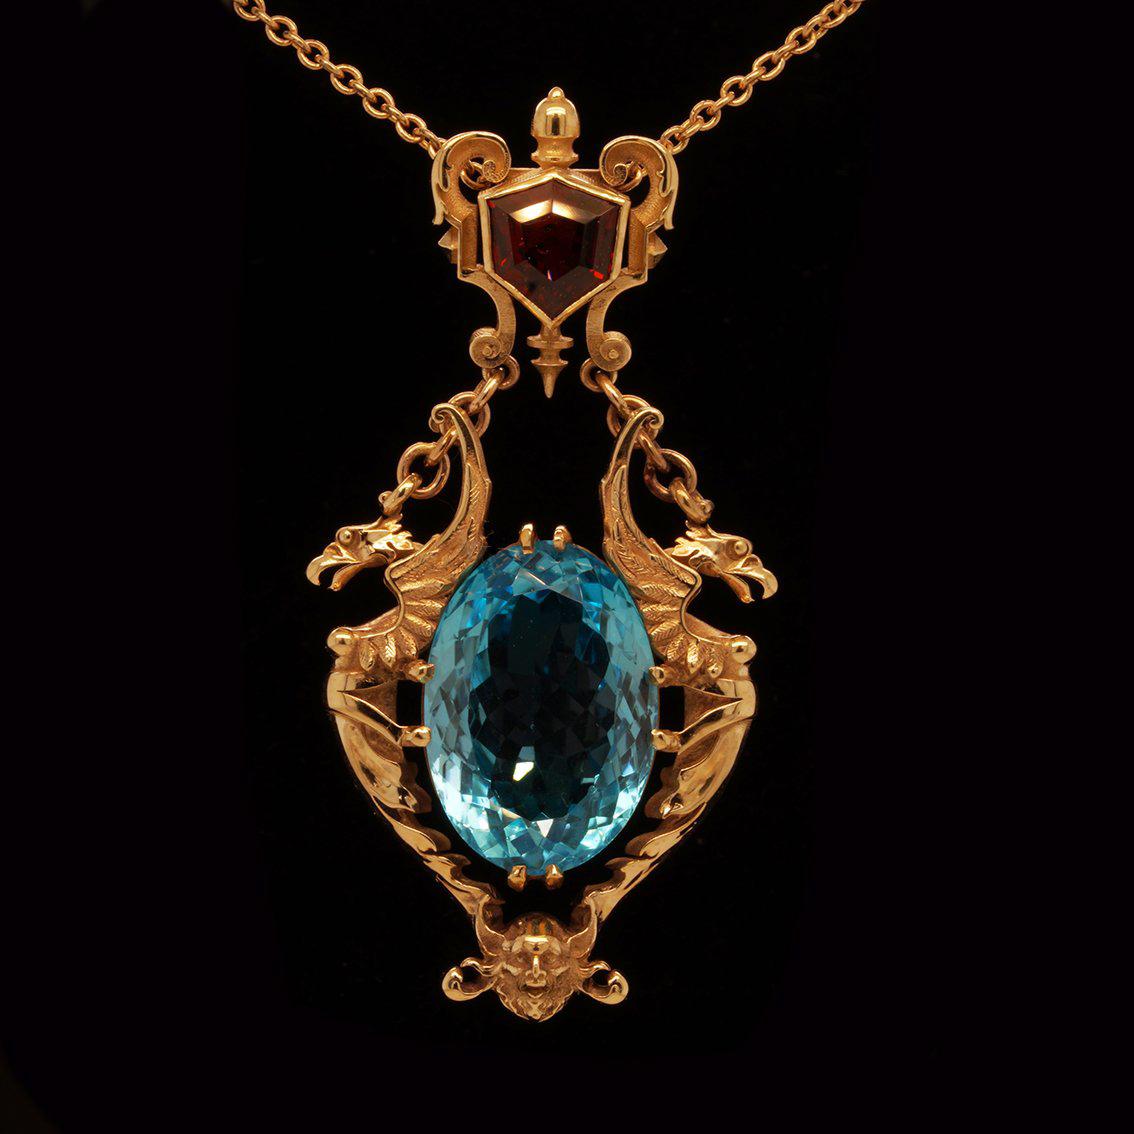 28ct Oval Swiss Blue Topaz, Garnet 9k Yellow Gold Antique Style Pendant Necklace For Sale 9